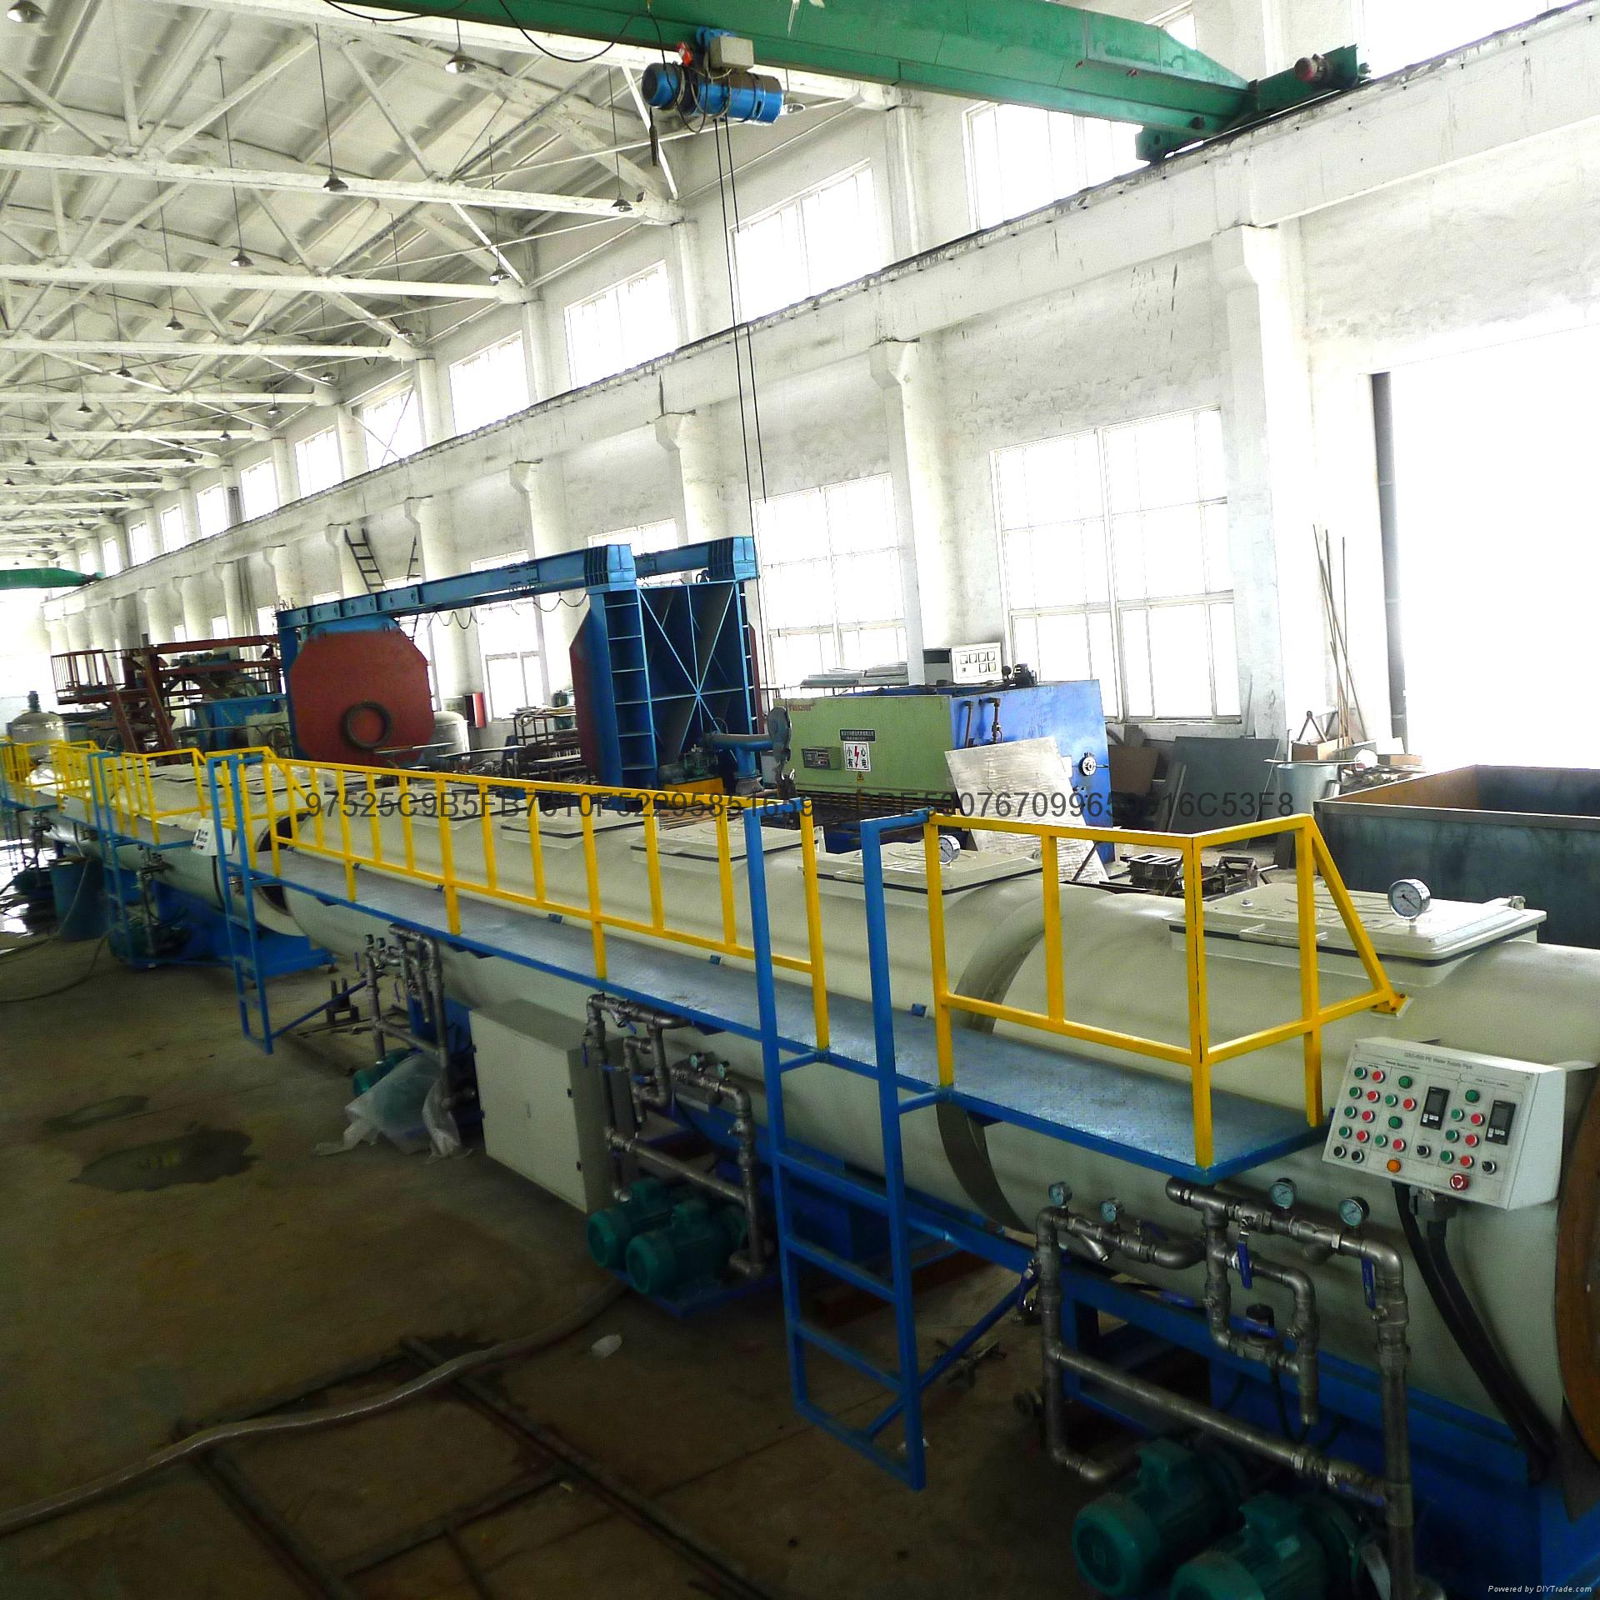  HDPE Water and Gas Supply Pipe Line 5